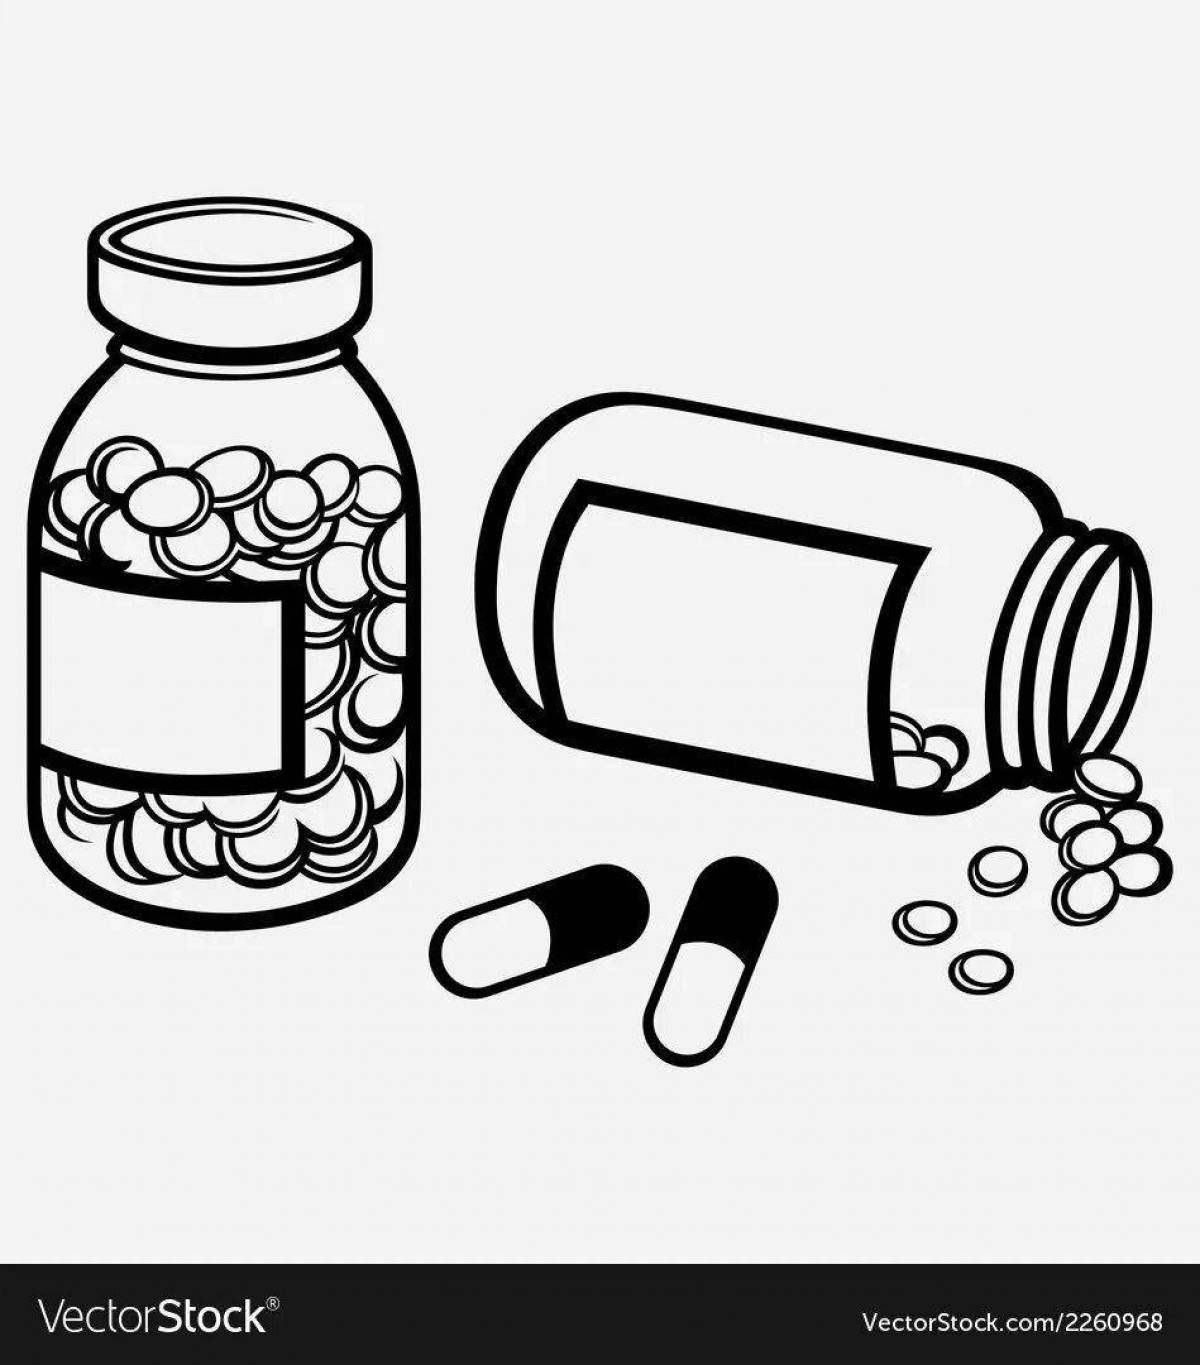 Medication coloring page